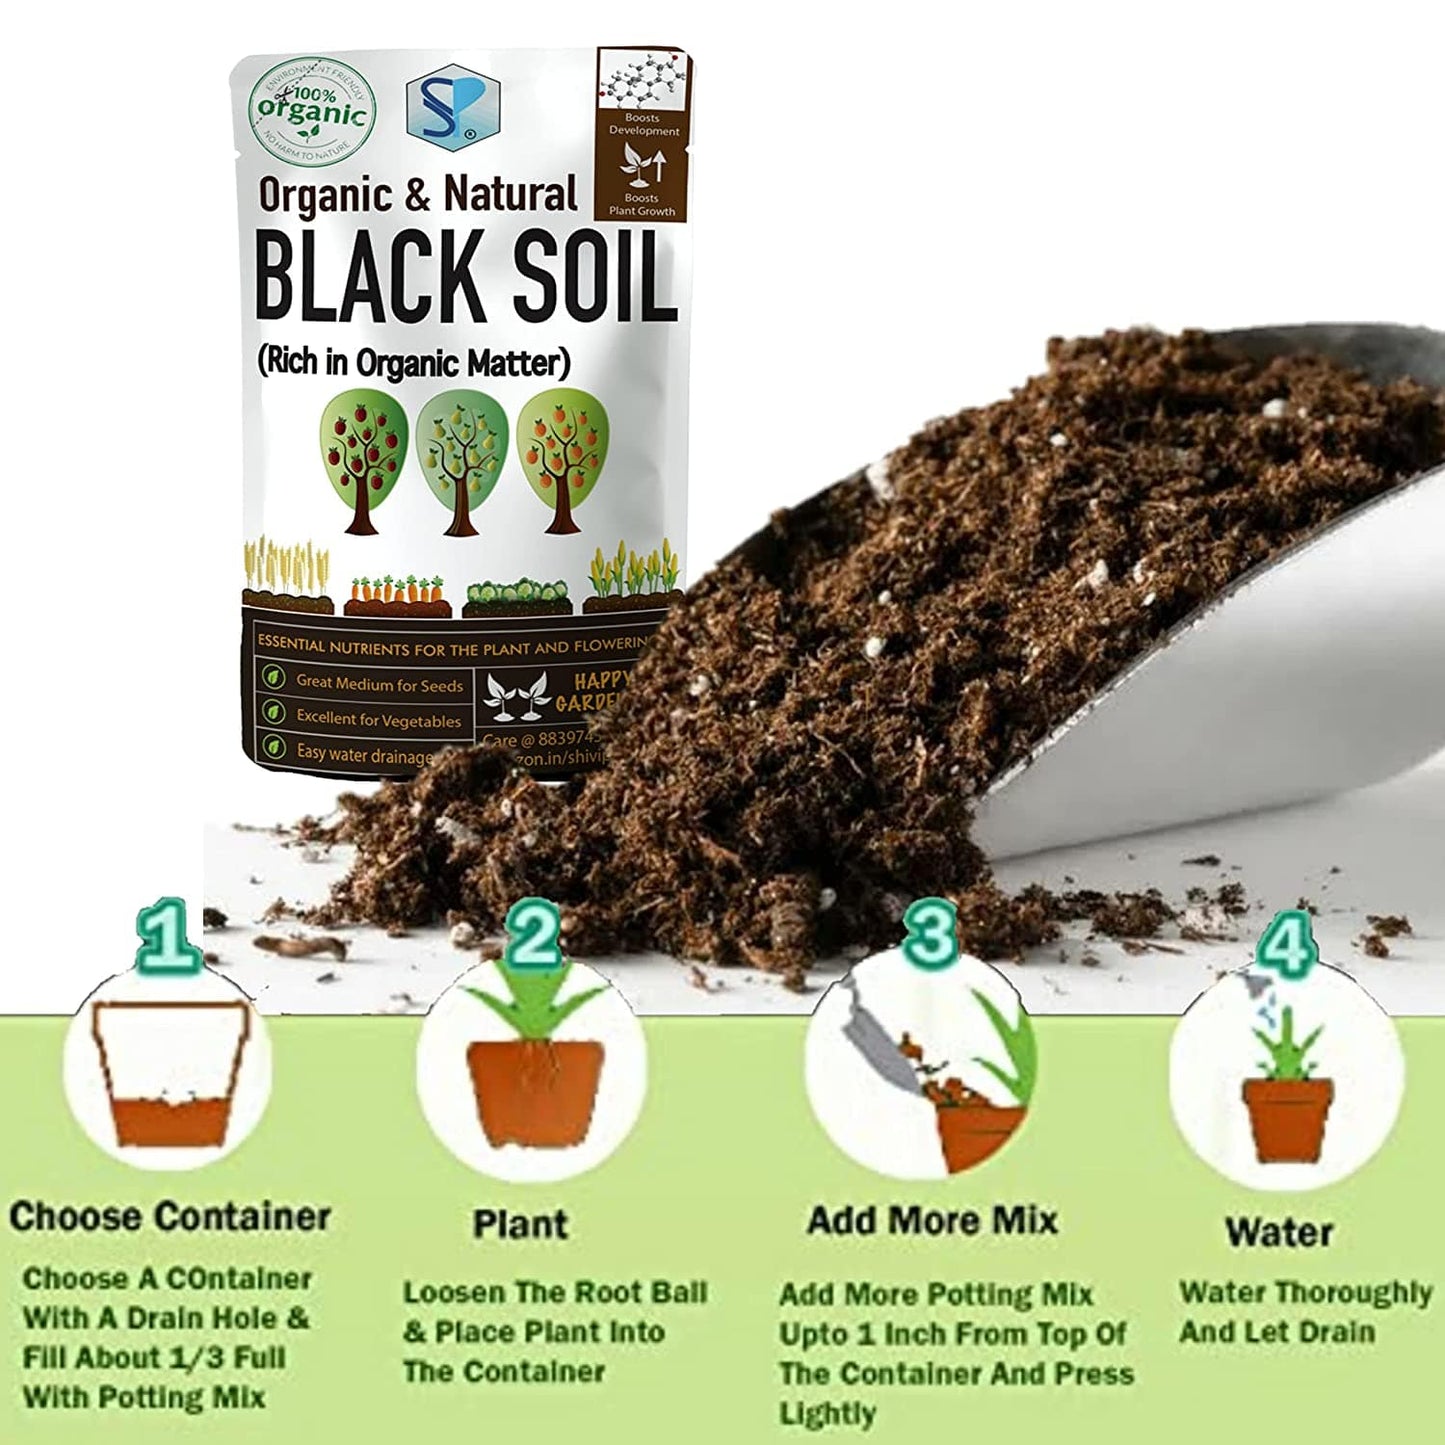 Best Deal for Rinnal Soilless Growing Media for Potting Mix, 50% Rinnal